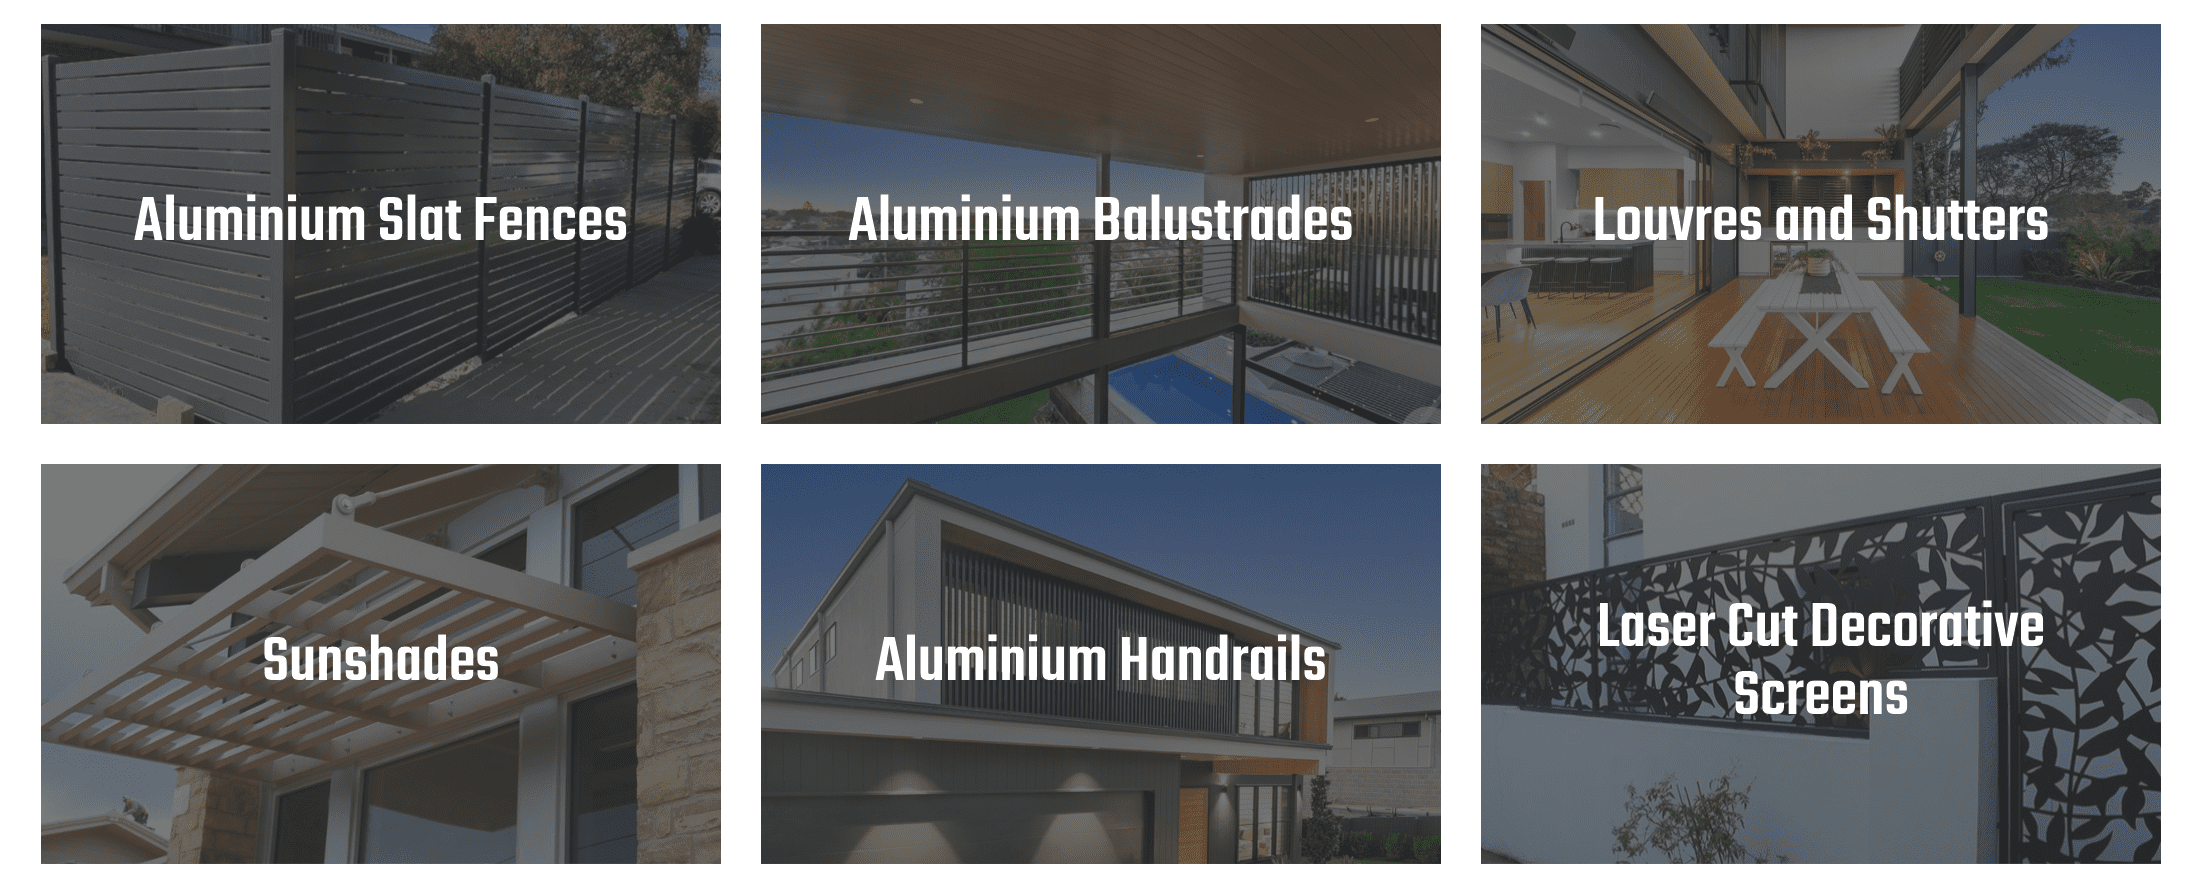 Luxe Metalworks services & products - Aluminium Fences, balustrades, louvres & shutters, sunshades, handrails and decorative screens.